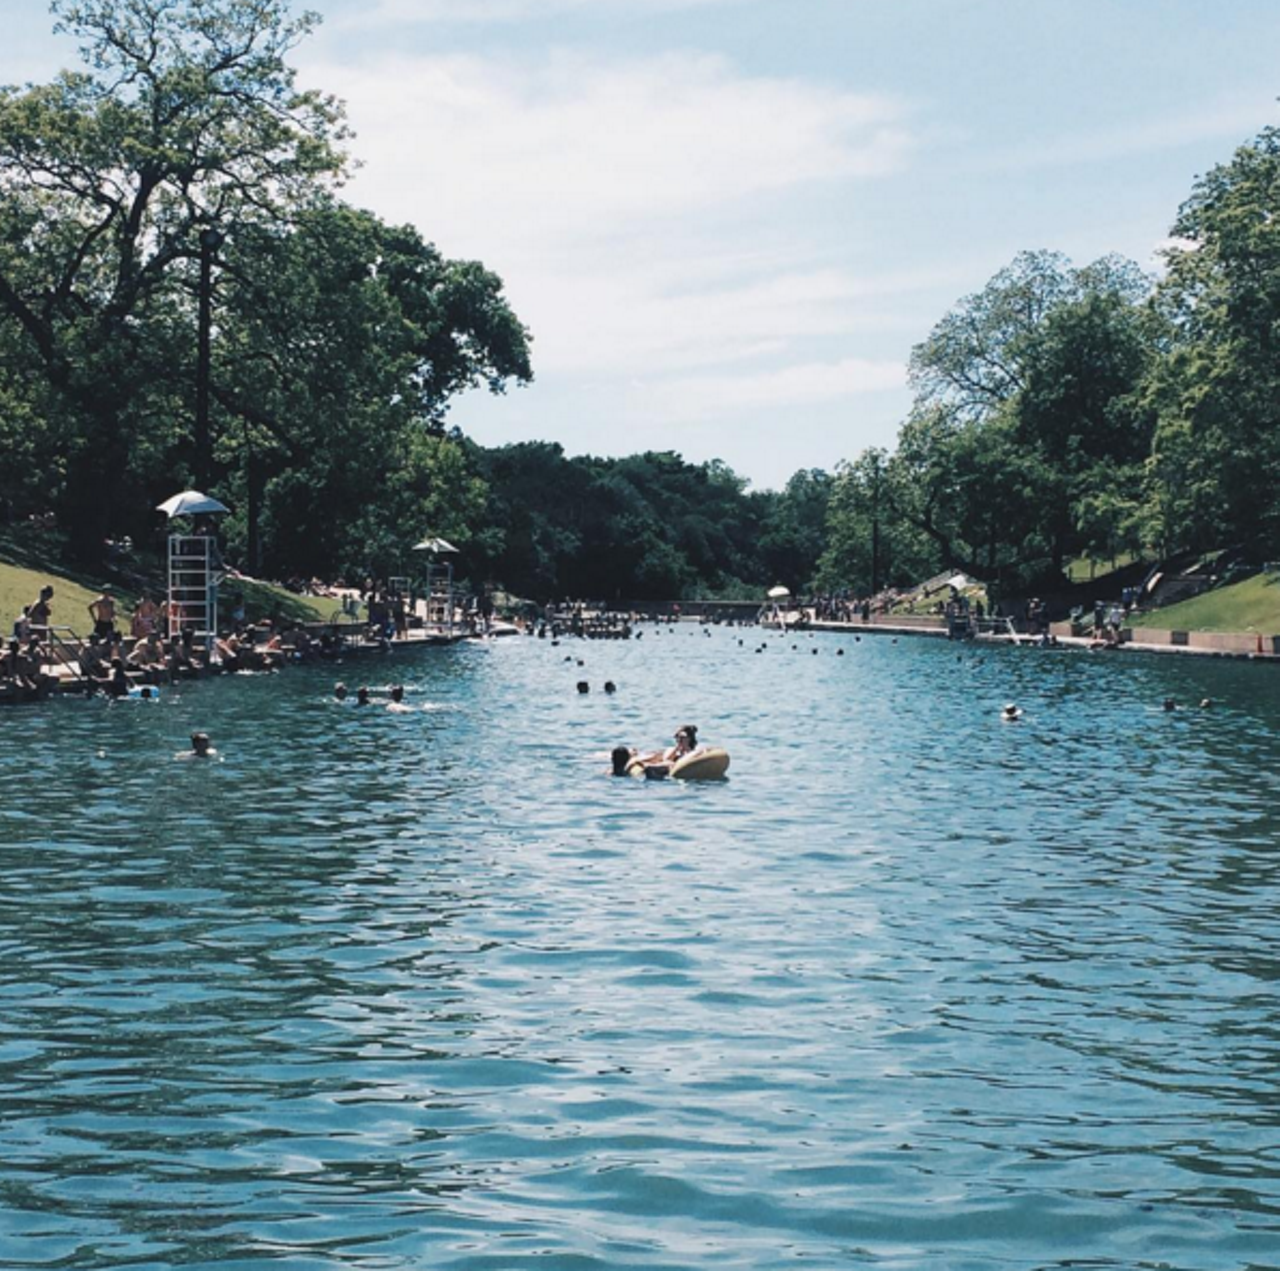  Barton Springs
Located in the center of Austin, Barton Springs is an hour and a half away and is a good place for a summer dip. 
Photo via Instagram/courtneymchow